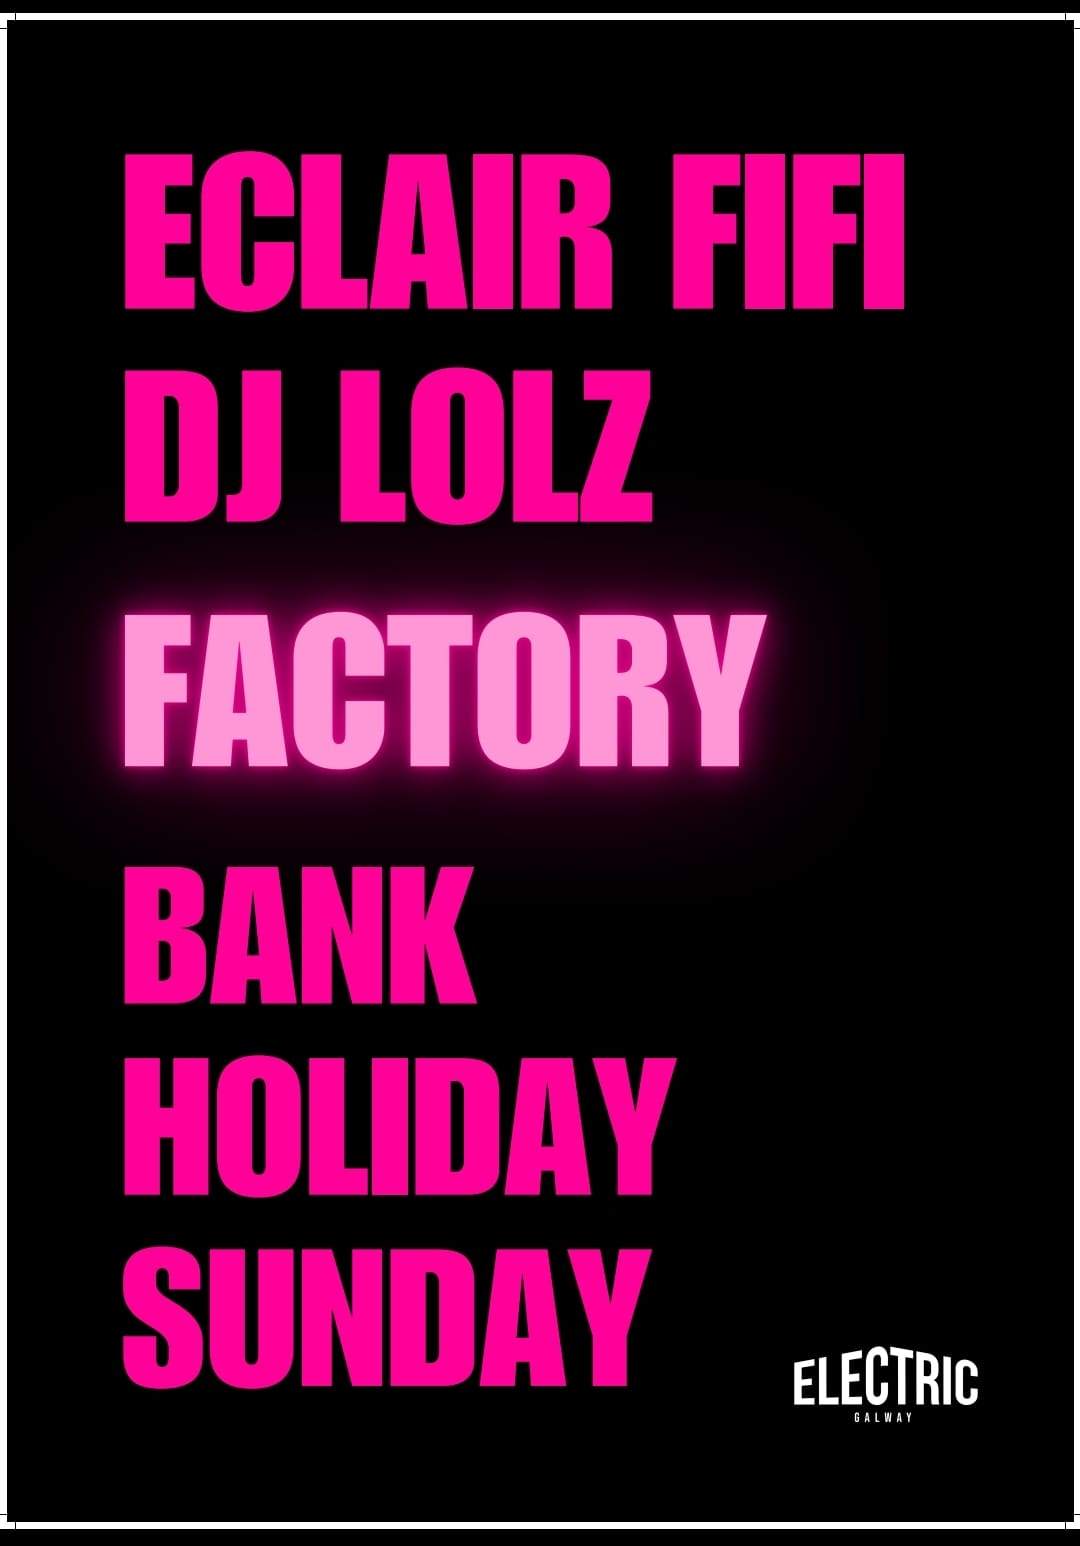 Electric presents Eclair Fifi - フライヤー表